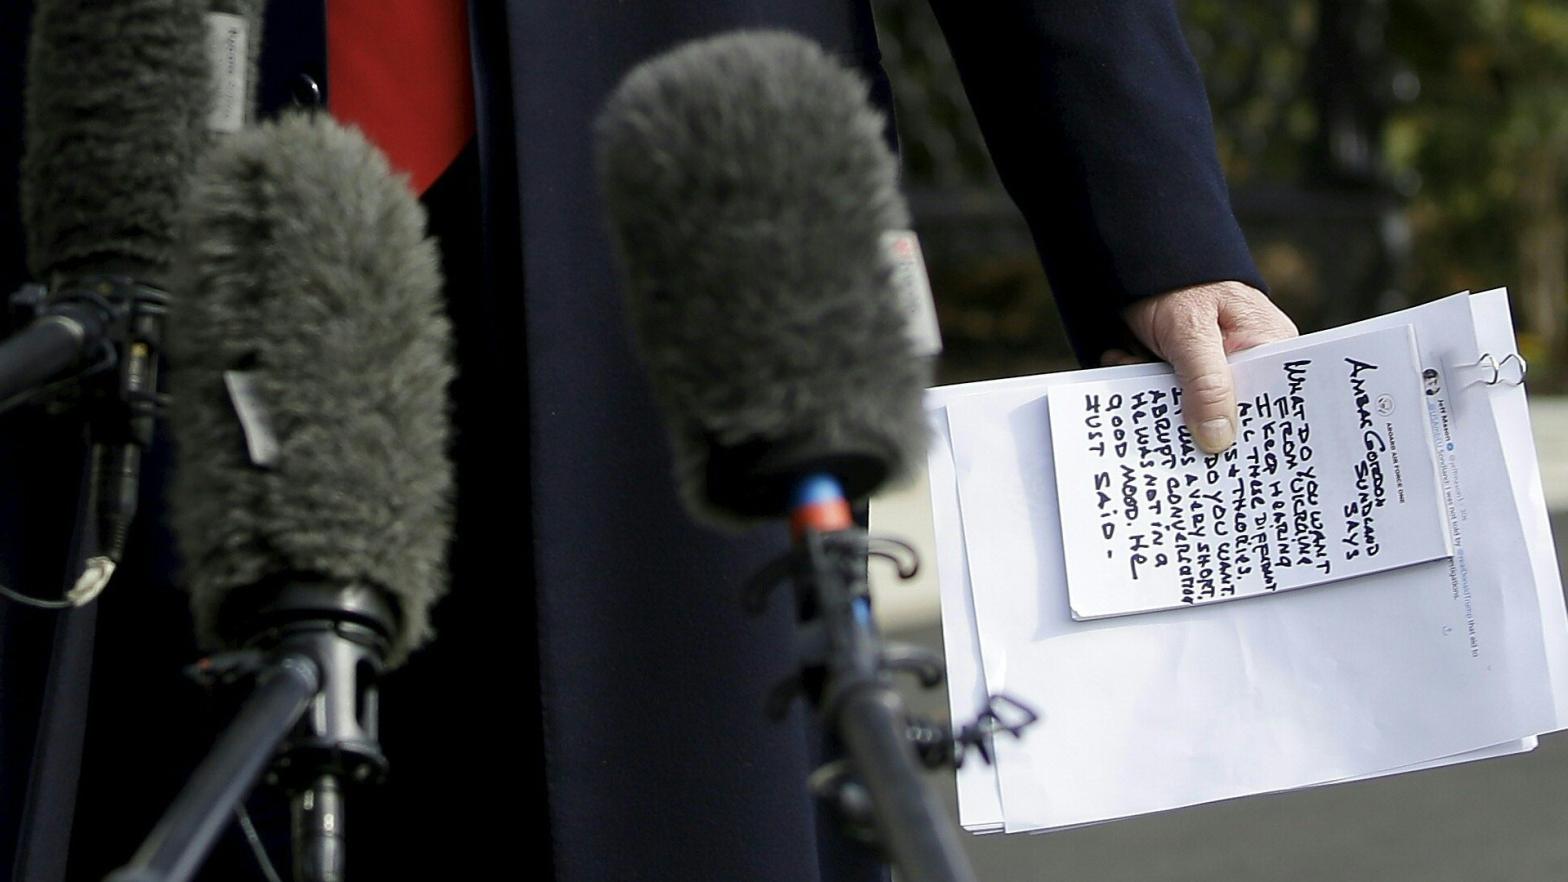 Donald Trump holding notes at the White House on November 20, 2019, presumably a record that has been retained by the Trump Presidential Library, provided he didn't destroy it first. (Photo: Joshua Lott / AFP, Getty Images)